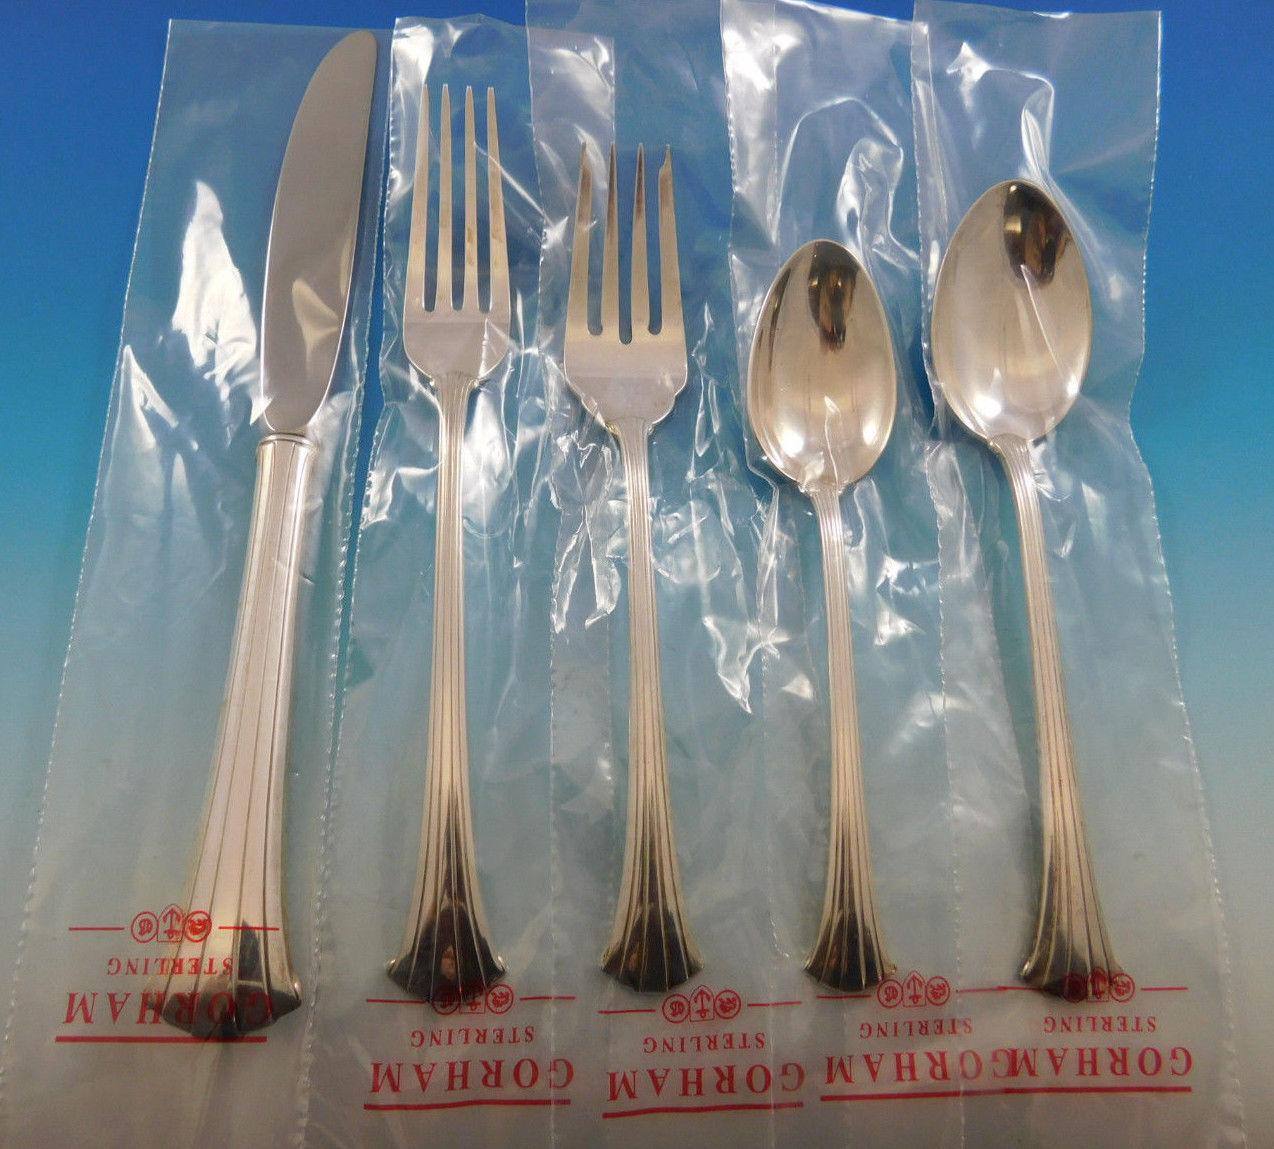 Gorgeous unused Newport Scroll by Gorham sterling silver flatware set of 64 pieces. This set includes:

12 place knives, 9 1/8